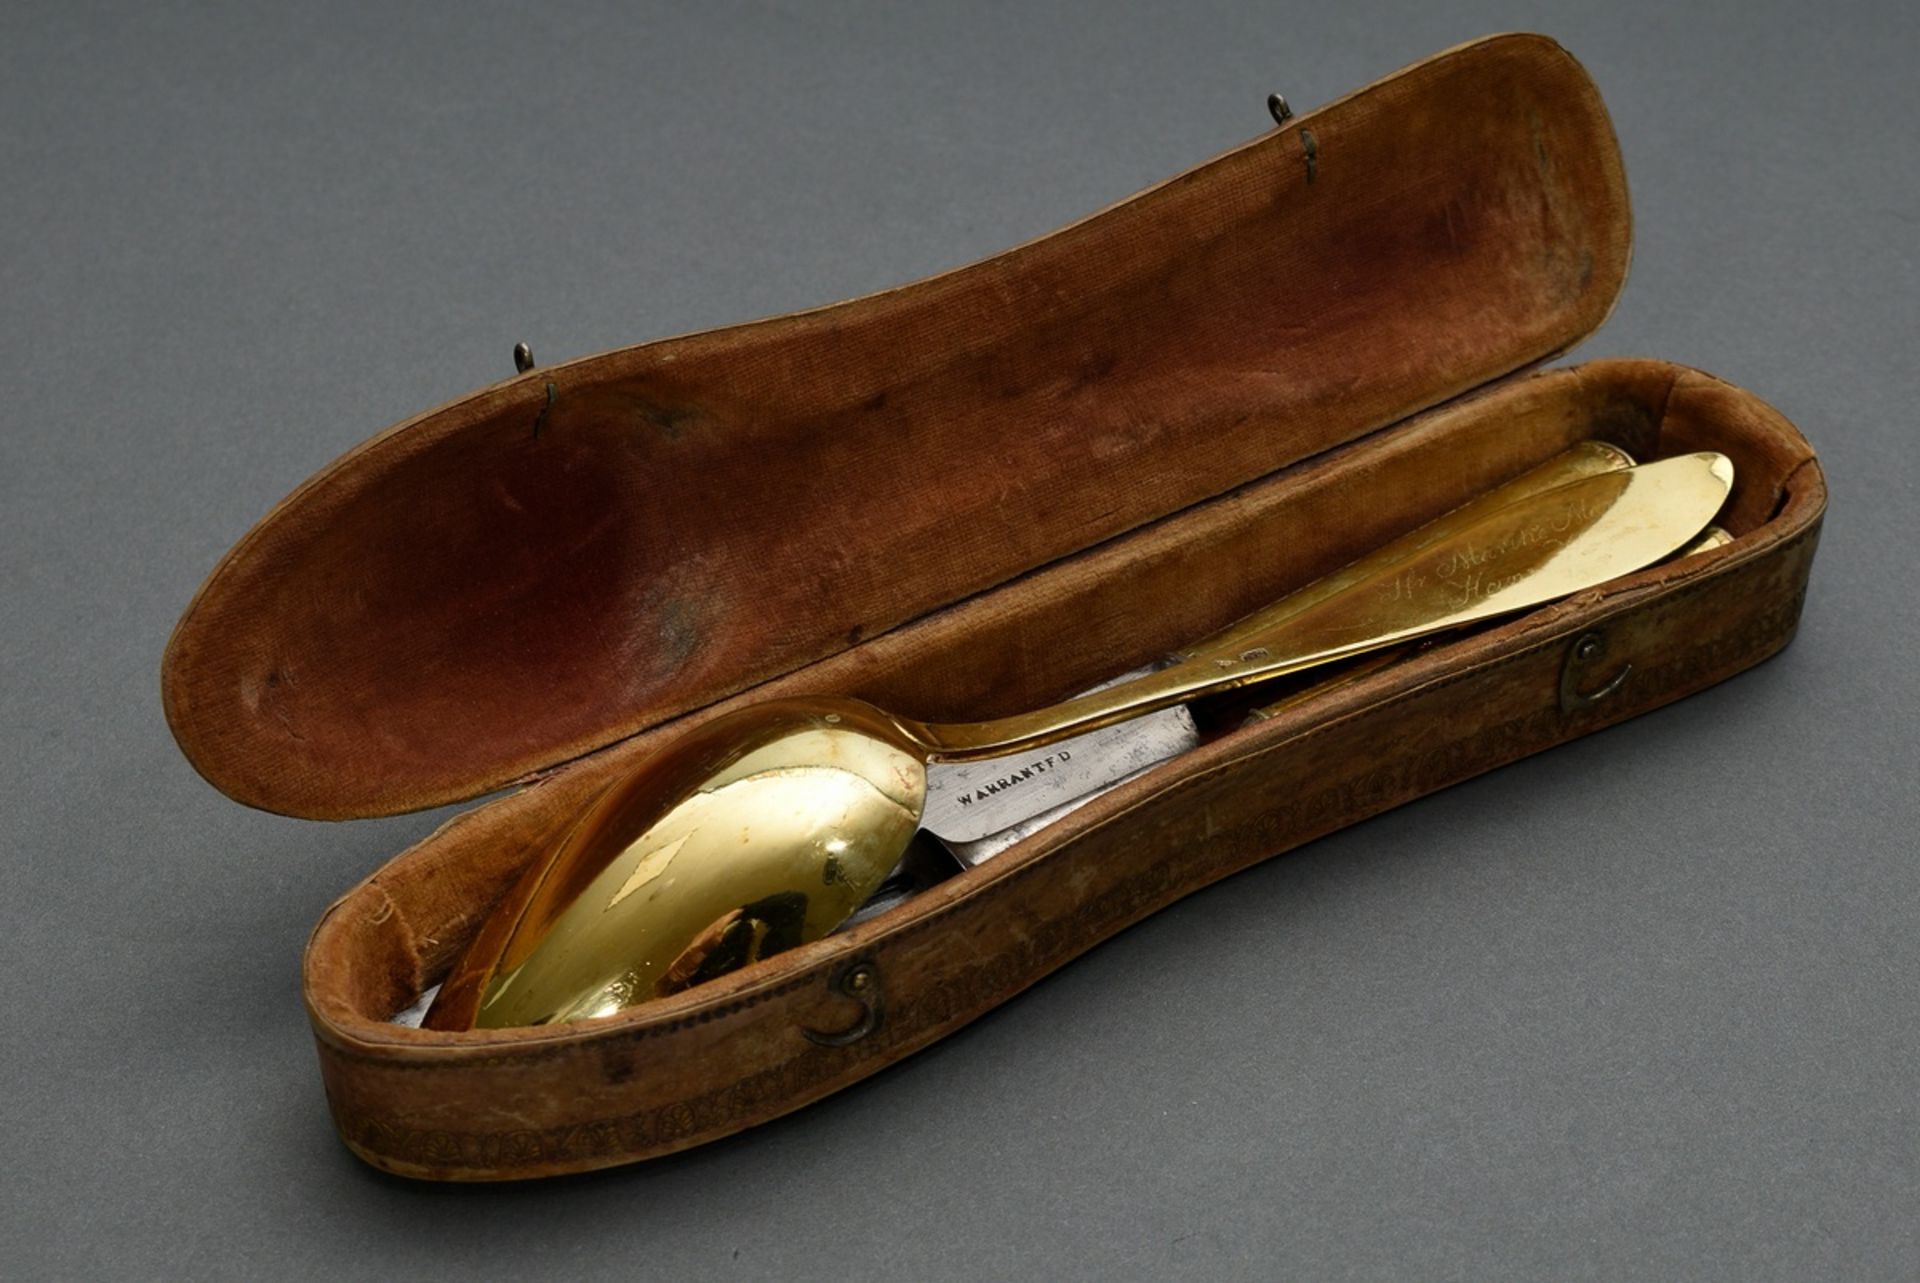 3 Pieces of antique travelling cutlery in a hallmarked leather case, consisting of: knife and fork  - Image 5 of 7